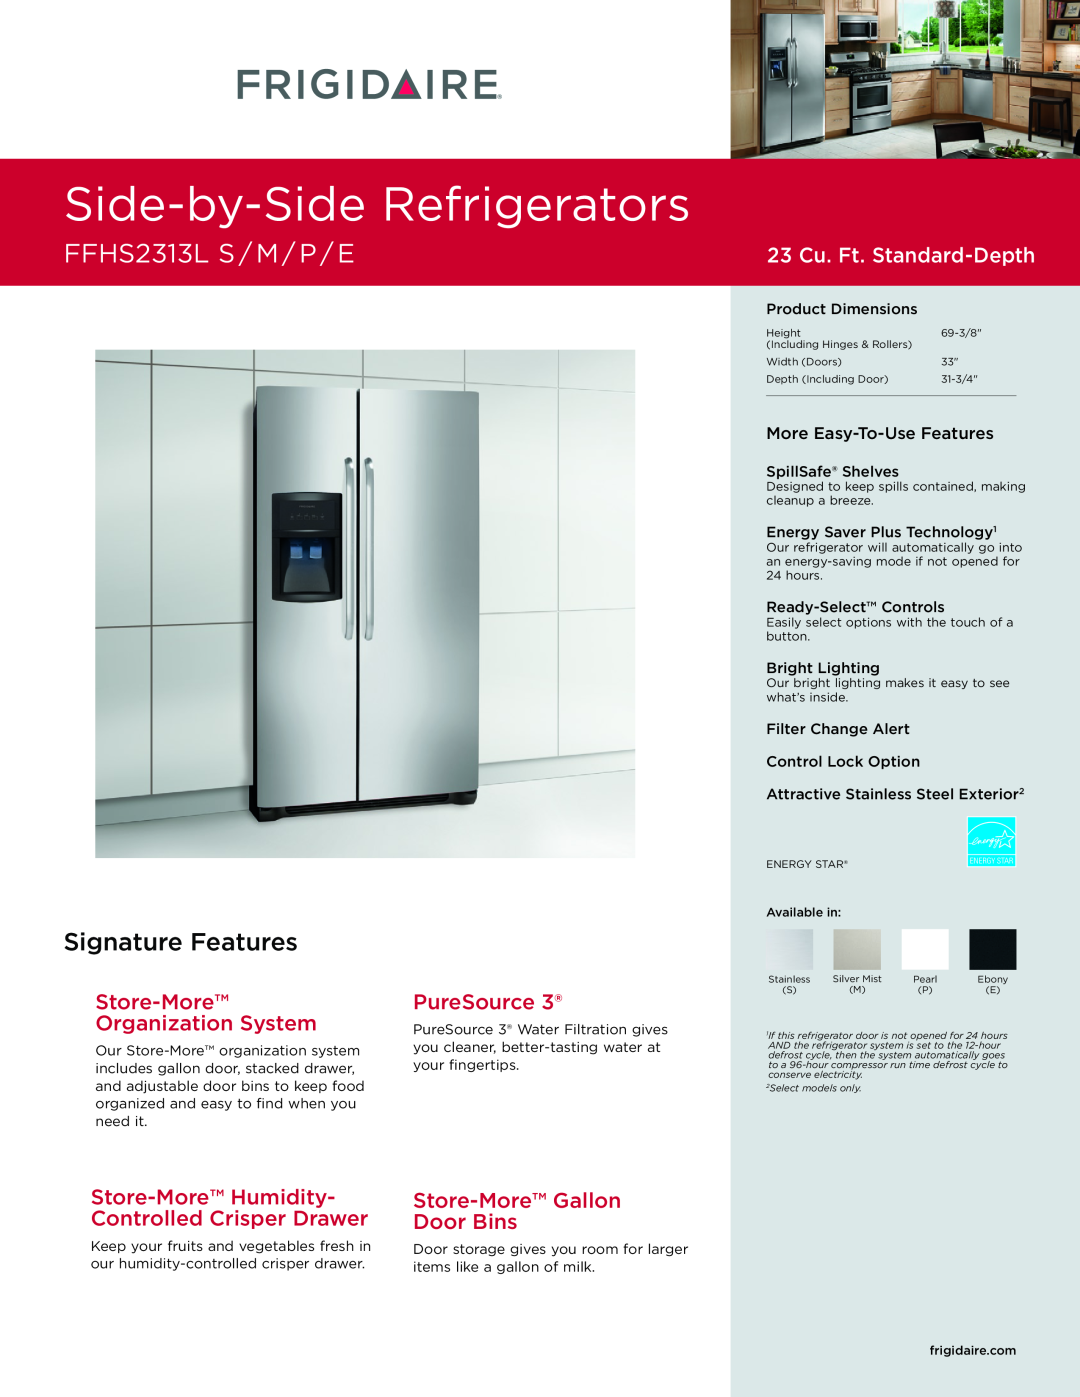 Frigidaire dimensions Side-by-SideRefrigerators, FFHS2313L S / M / P / E, Signature Features, 23 Cu. Ft. Standard-Depth 